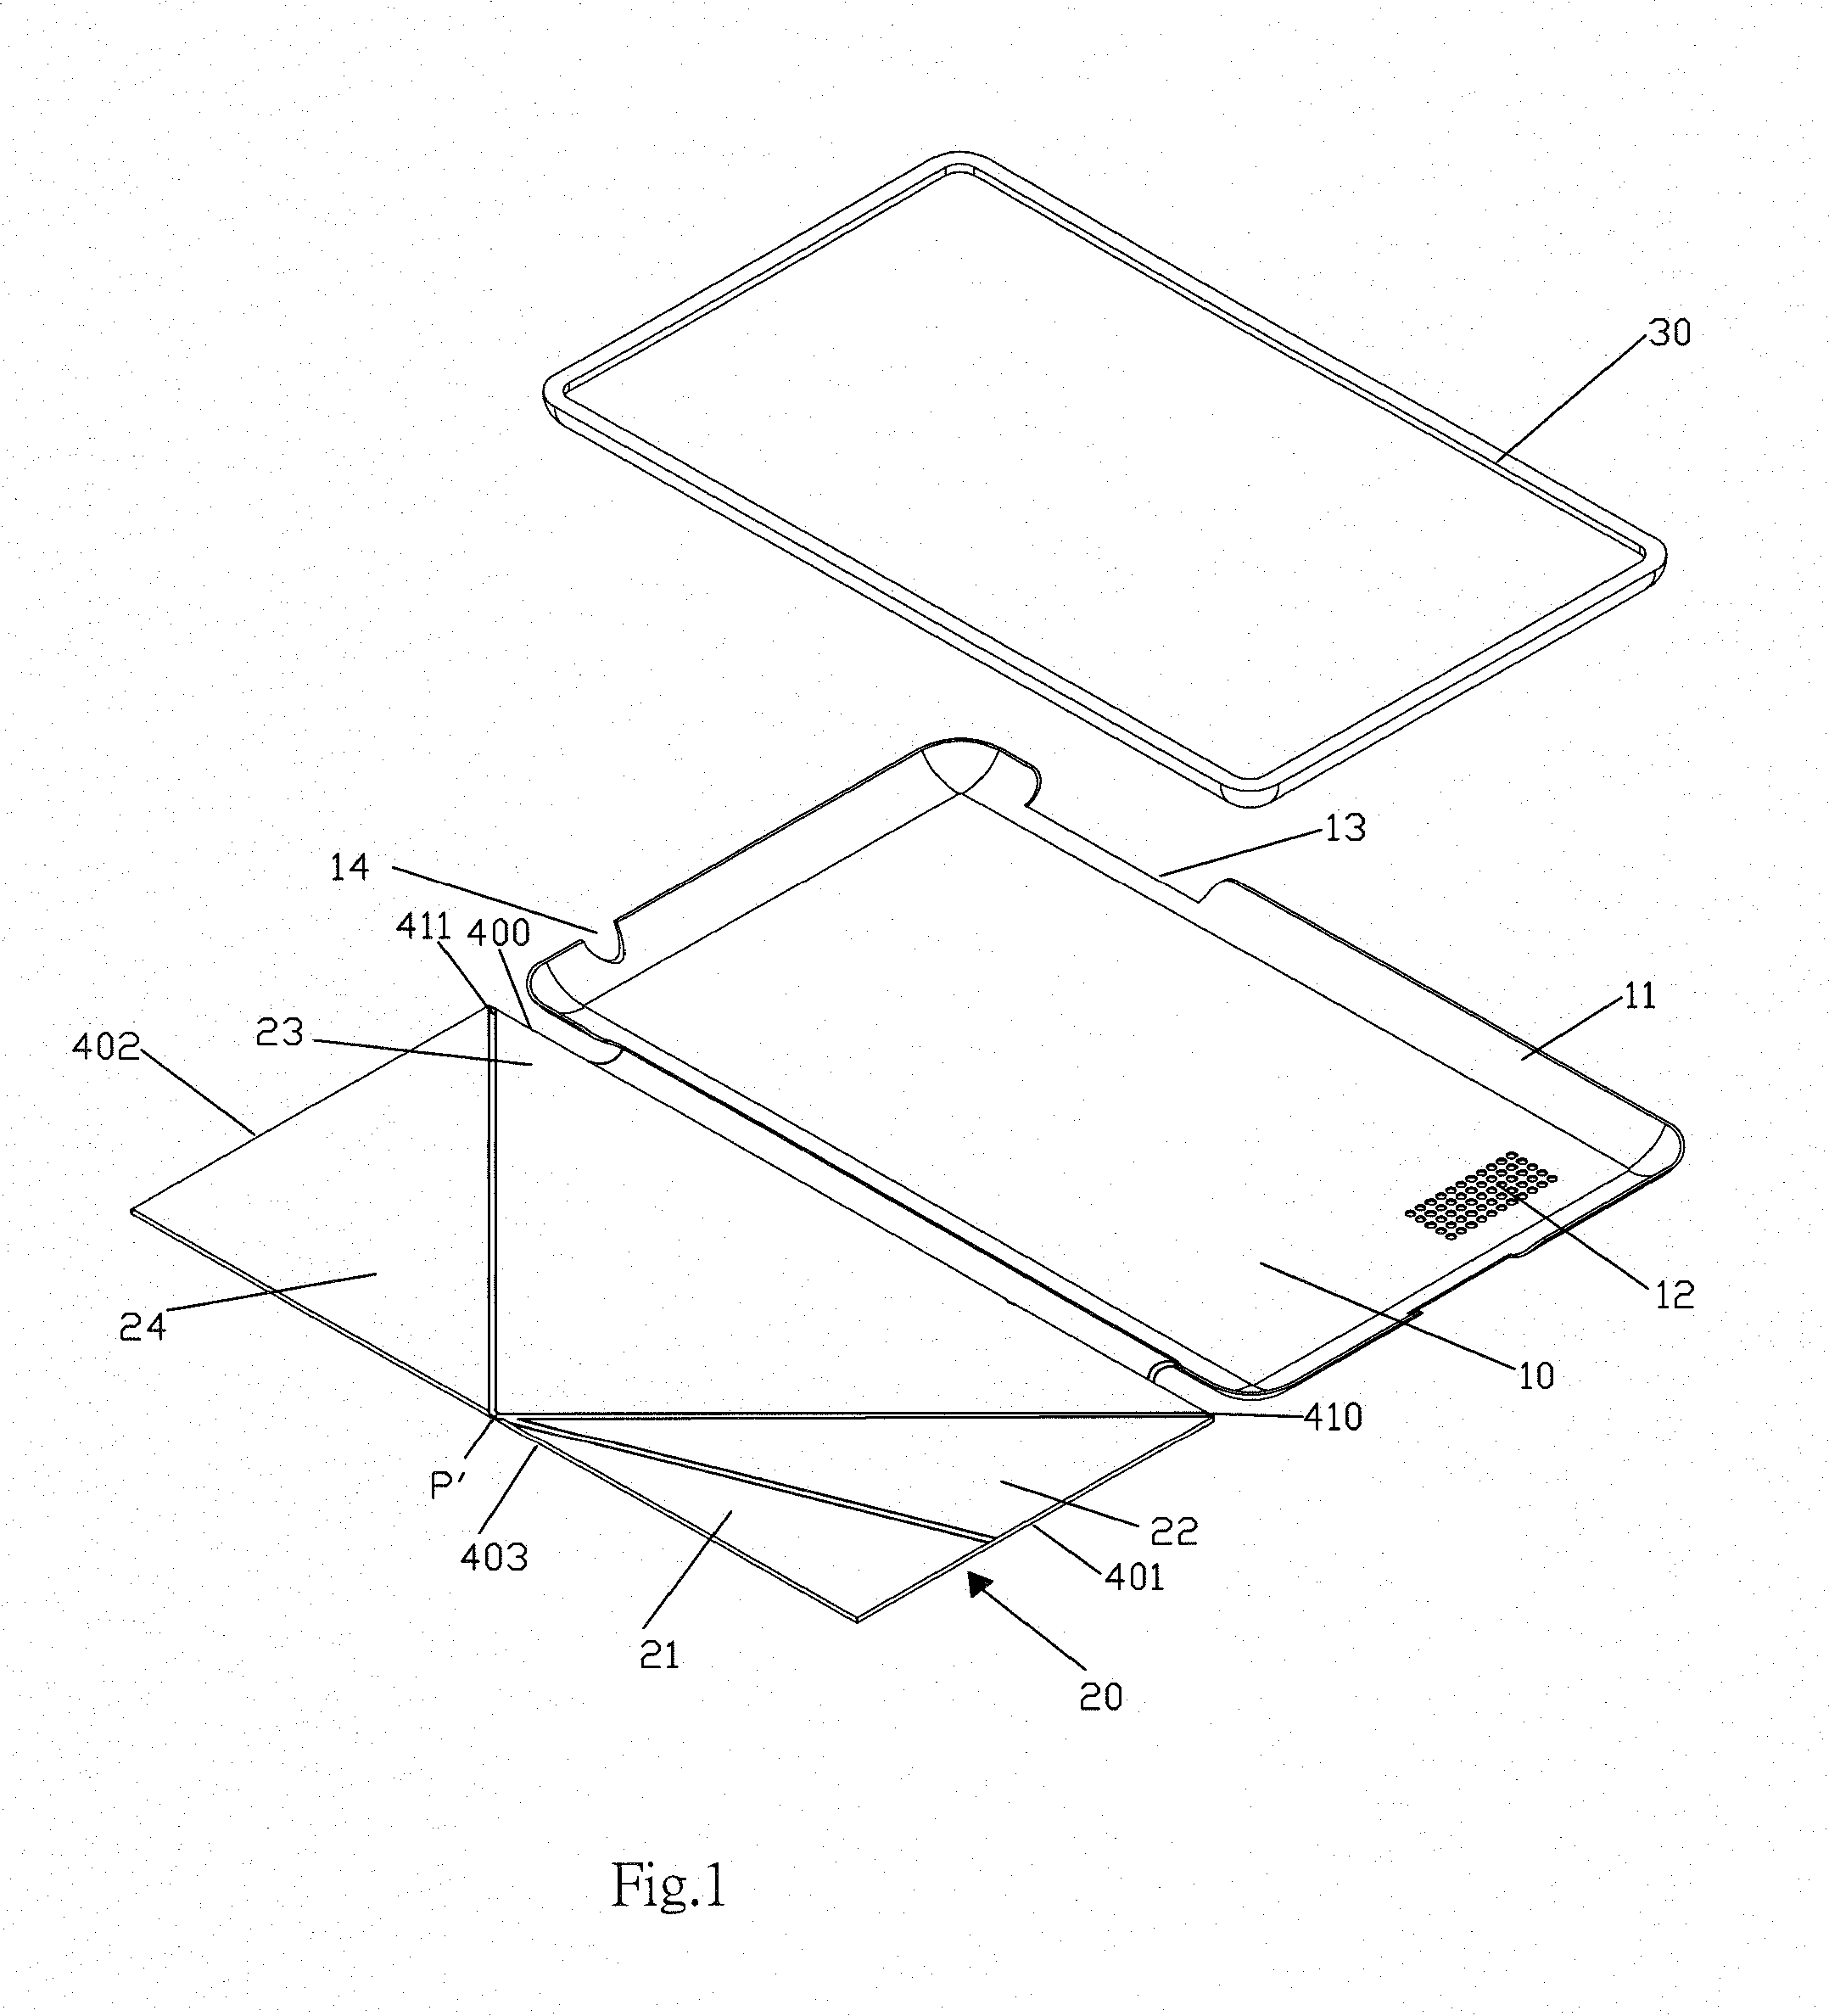 Cover for packaging and supporting tablet computer